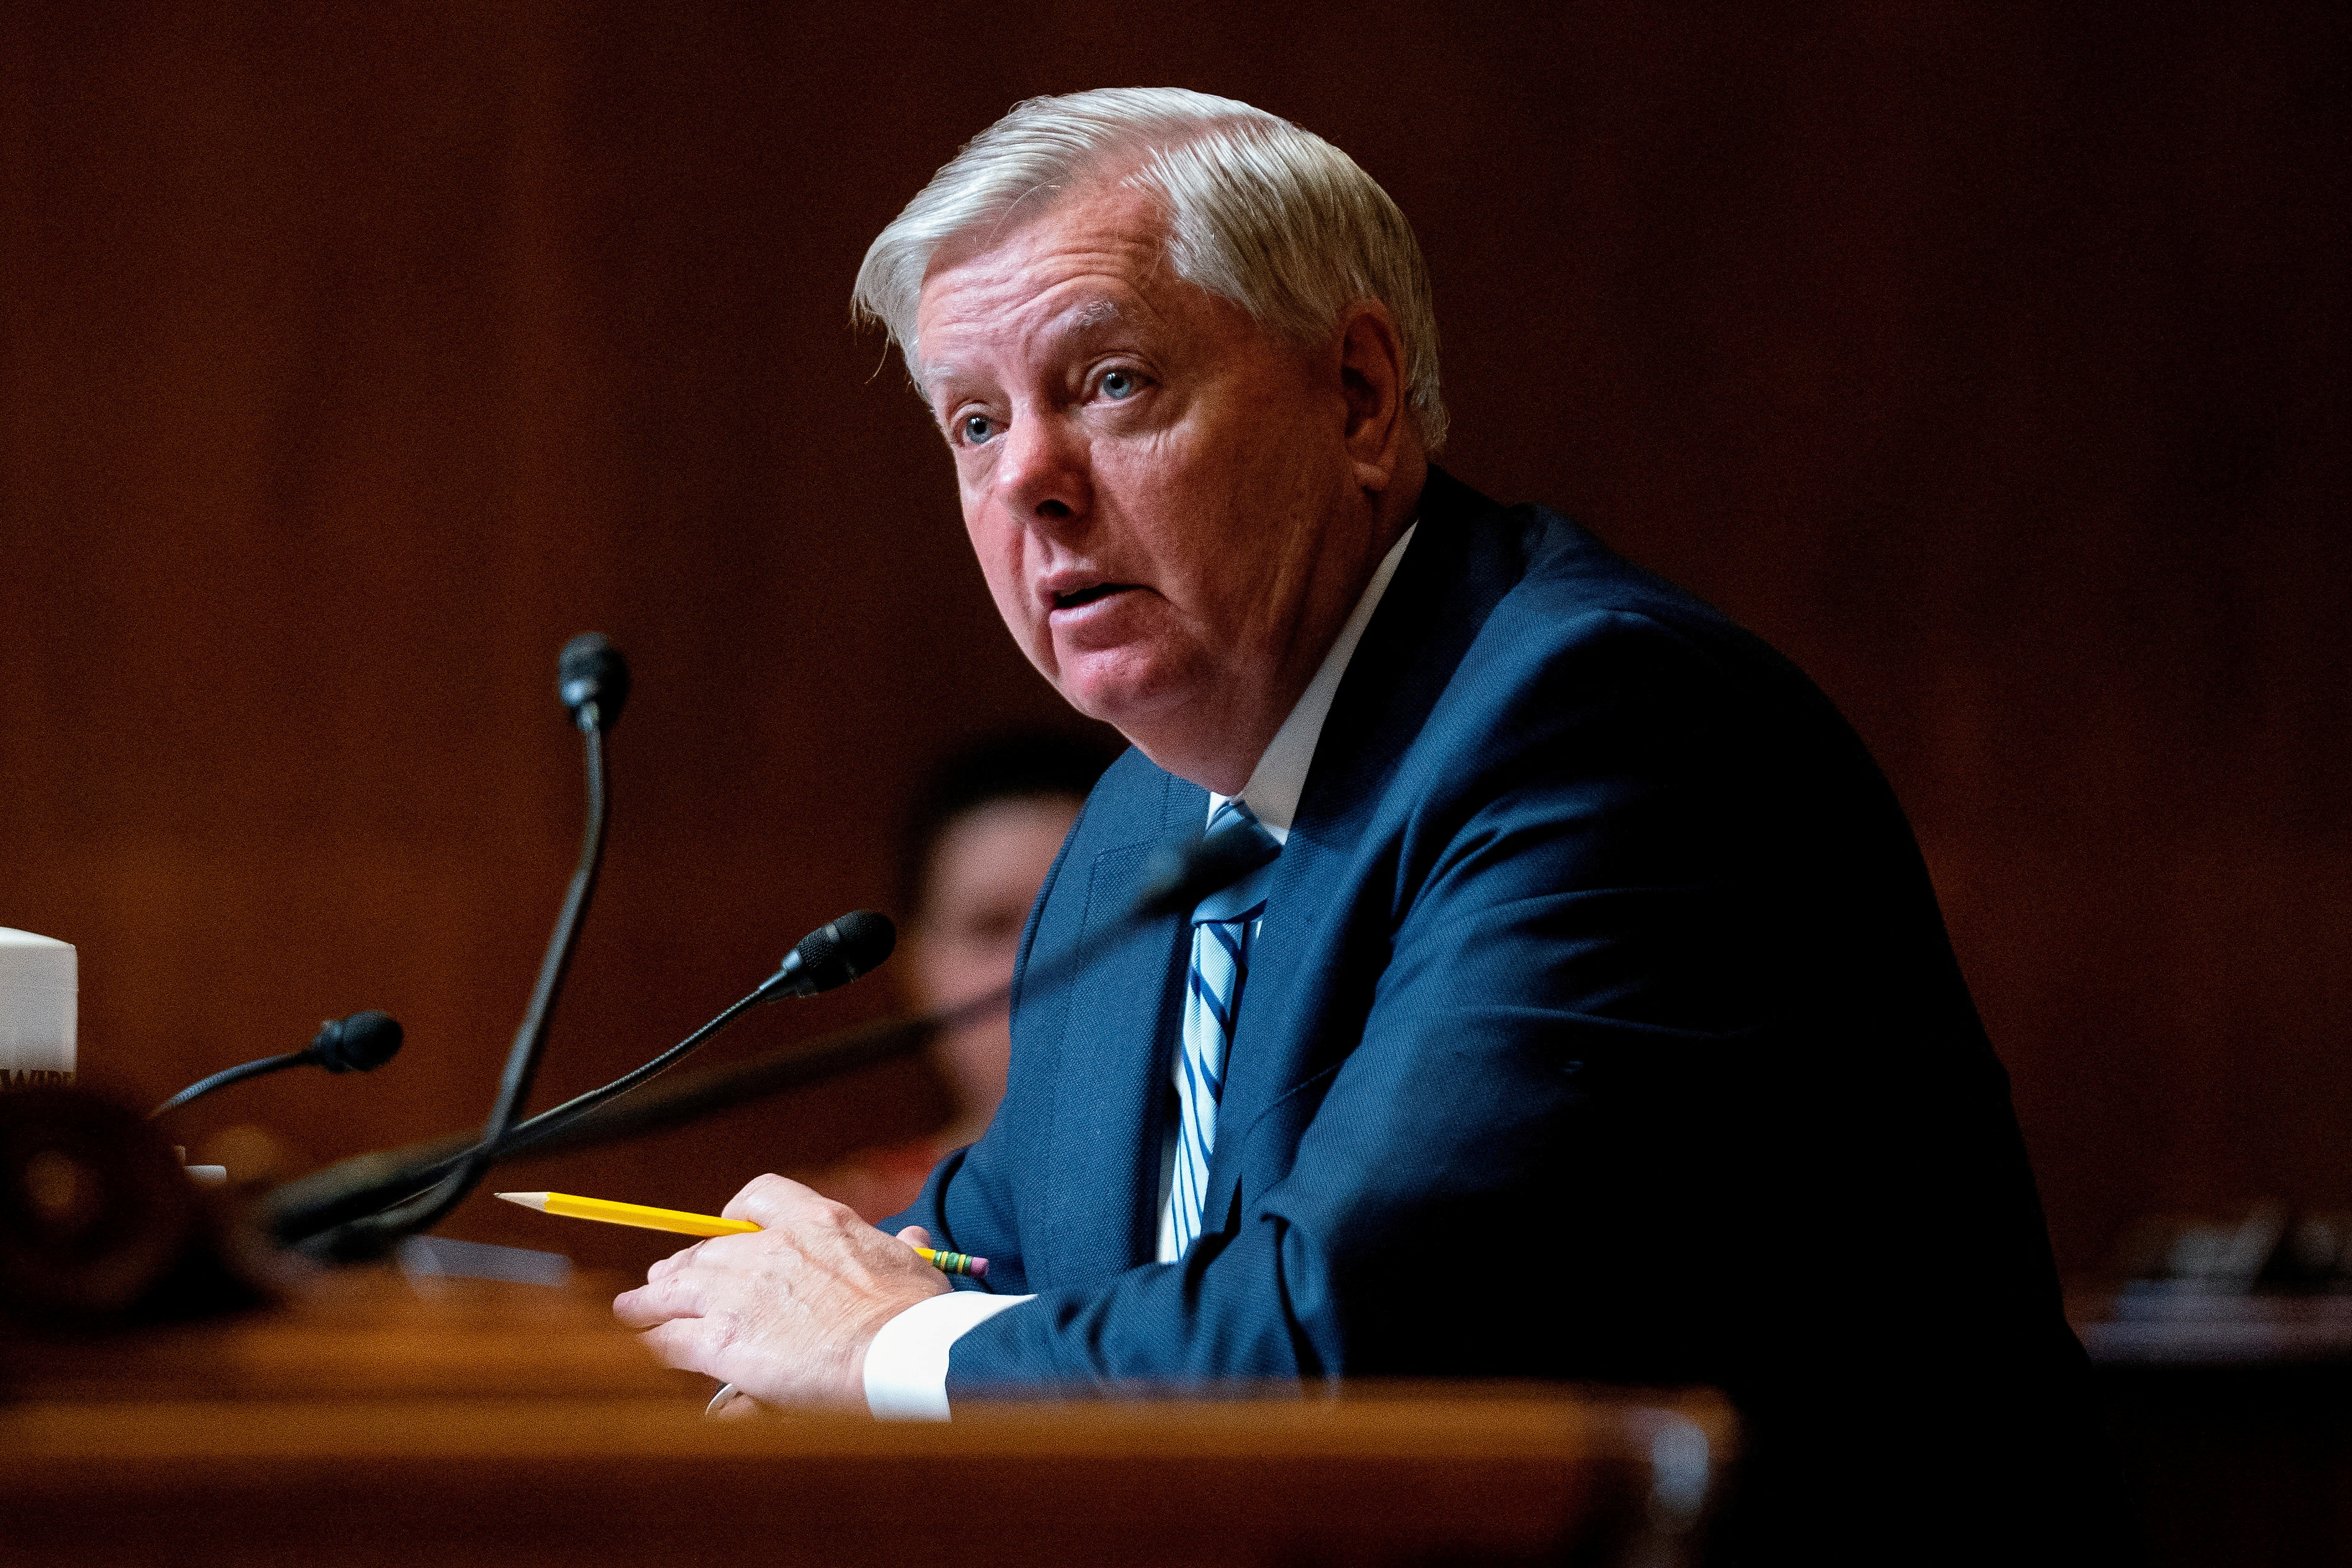 US Senator Lindsey Graham (R-SC) poses questions to Attorney General Merrick Garland during a Senate Appropriations Subcommittee on Appropriations